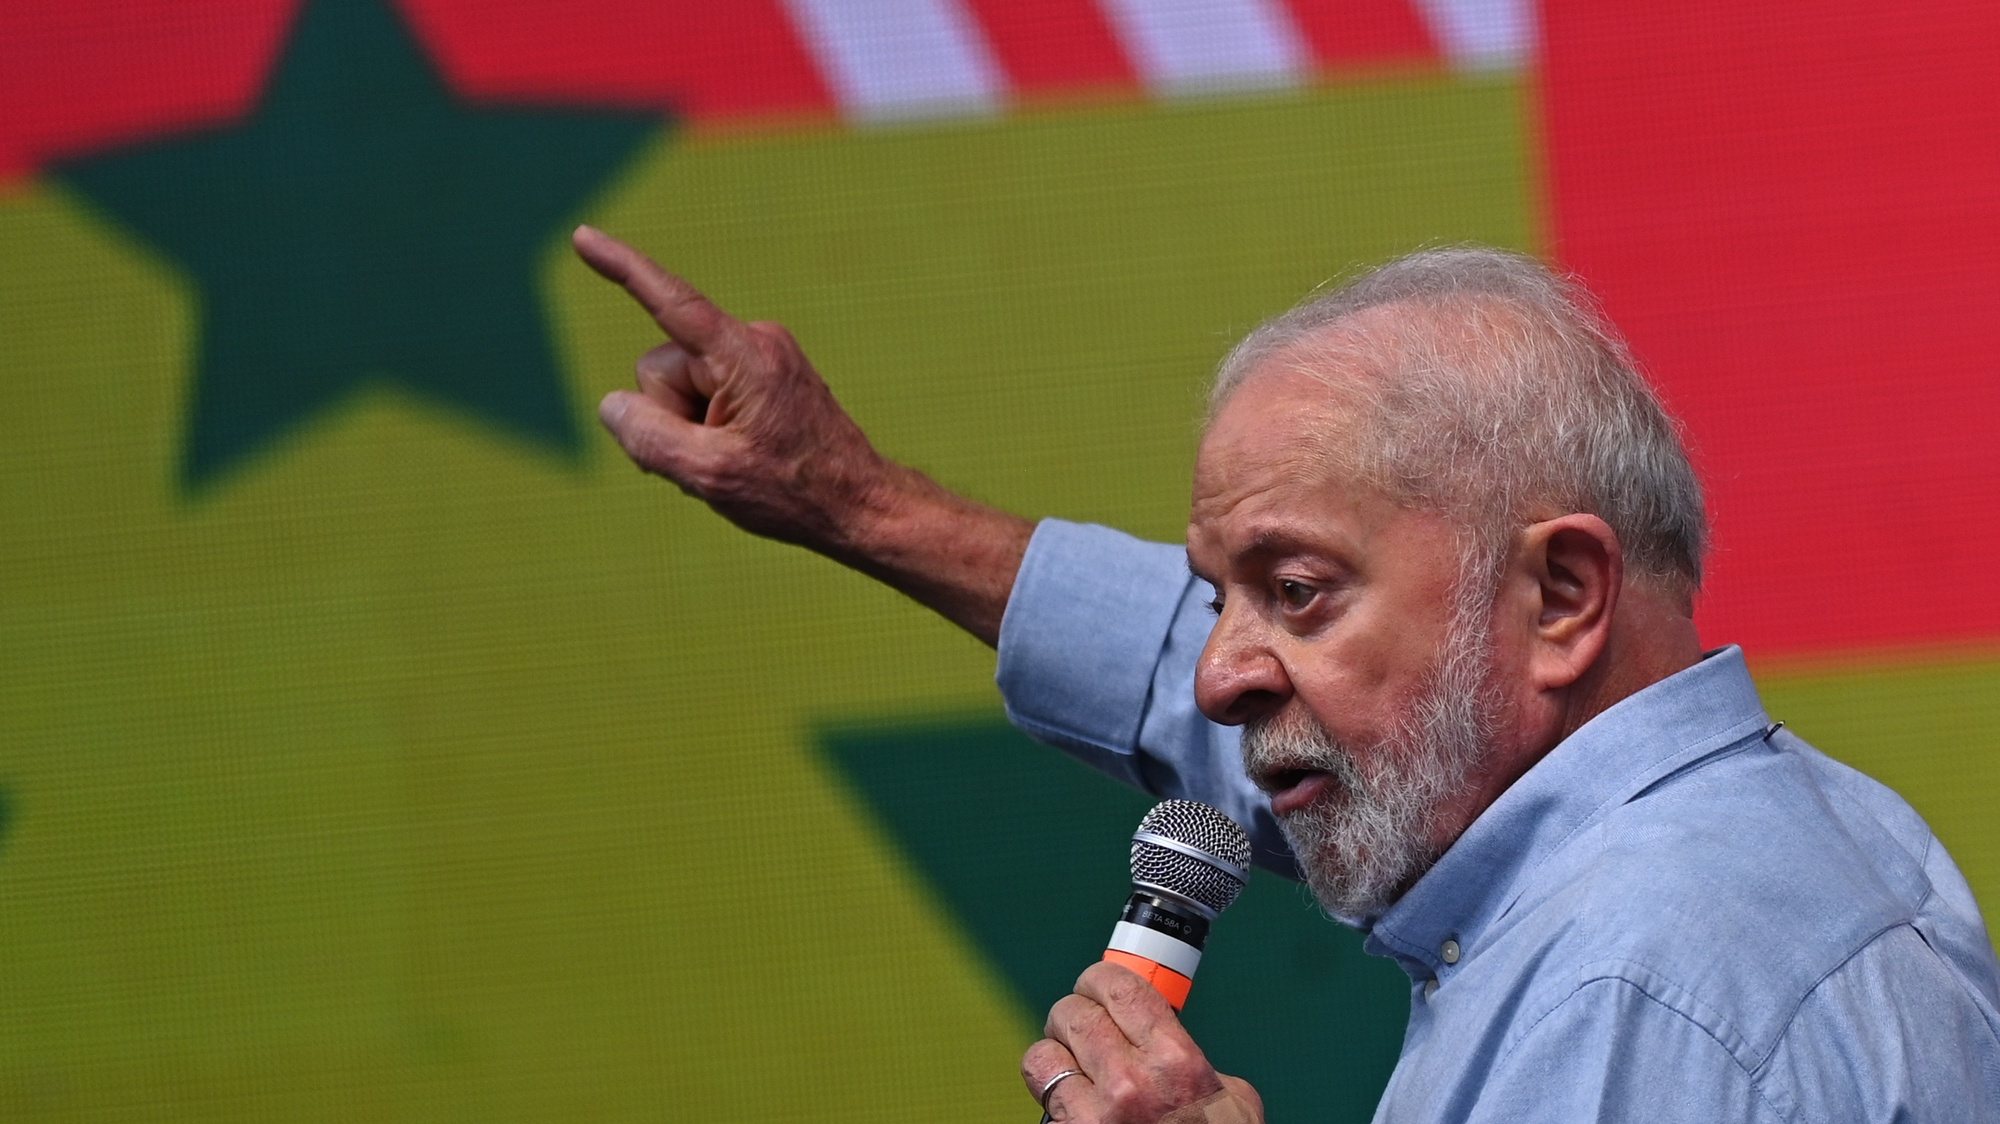 epa11041373 The President of Brazil, Luiz Inacio Lula da Silva, speaks during the Christmas celebration of recyclers and homeless people at the recycling cooperative fair at the Mane Garrincha Stadium in Brasilia, Brazil, 22 December 2023. Da Silva celebrated an early Christmas with thousands of collectors of recyclable materials and renewed his commitment to &#039;the recovery of the dignity of the poorest people.&#039;  EPA/Andre Borges